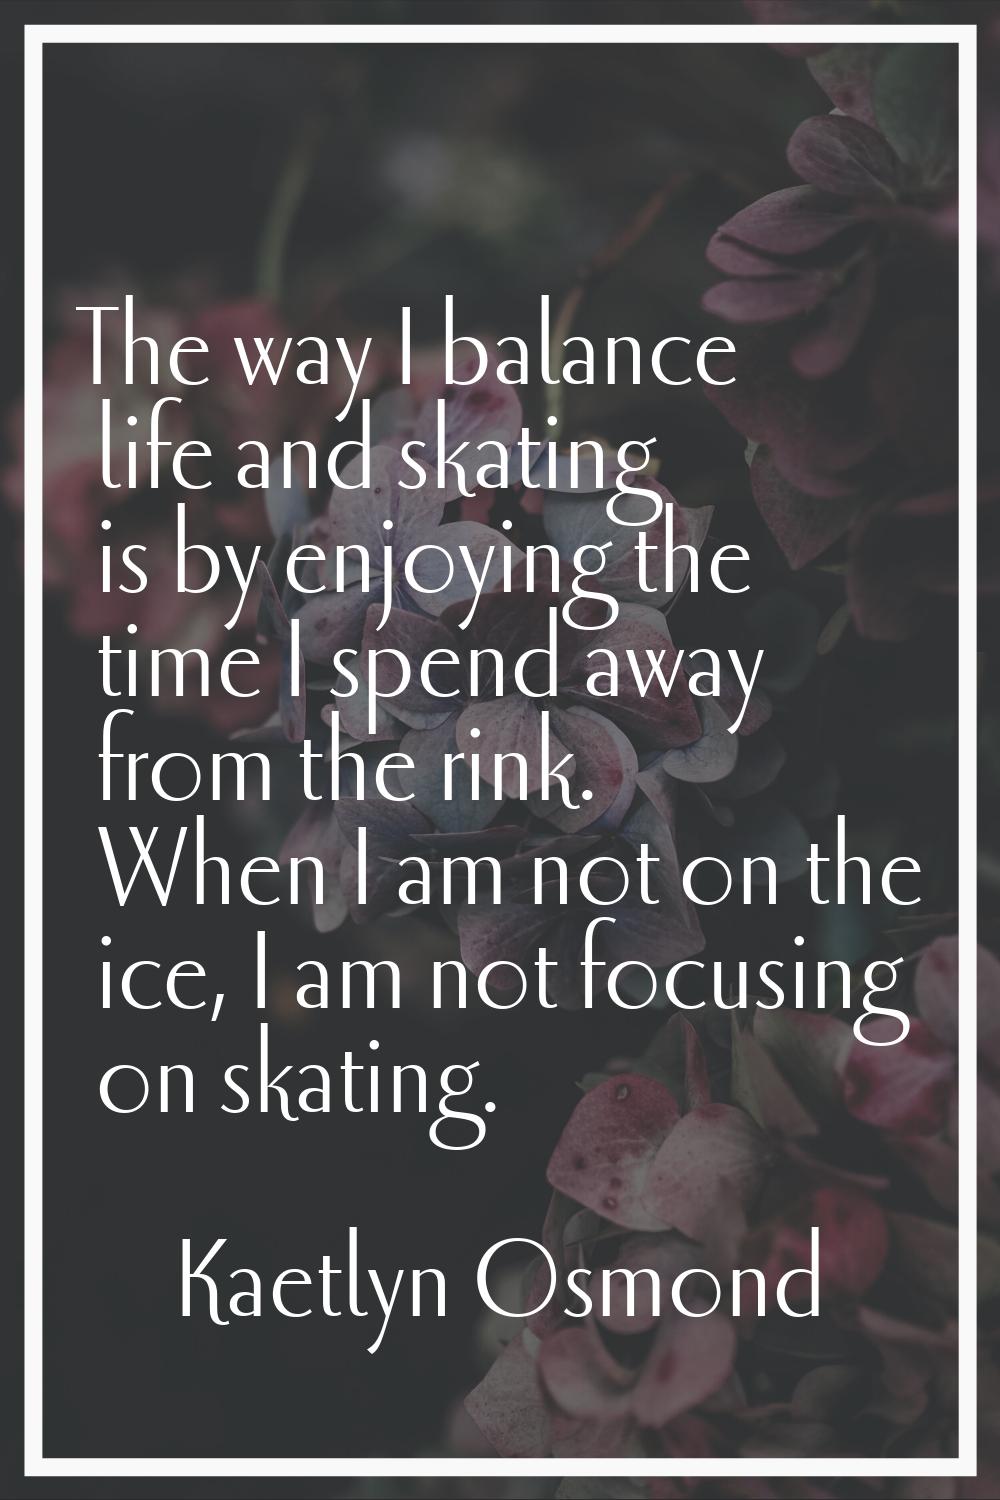 The way I balance life and skating is by enjoying the time I spend away from the rink. When I am no